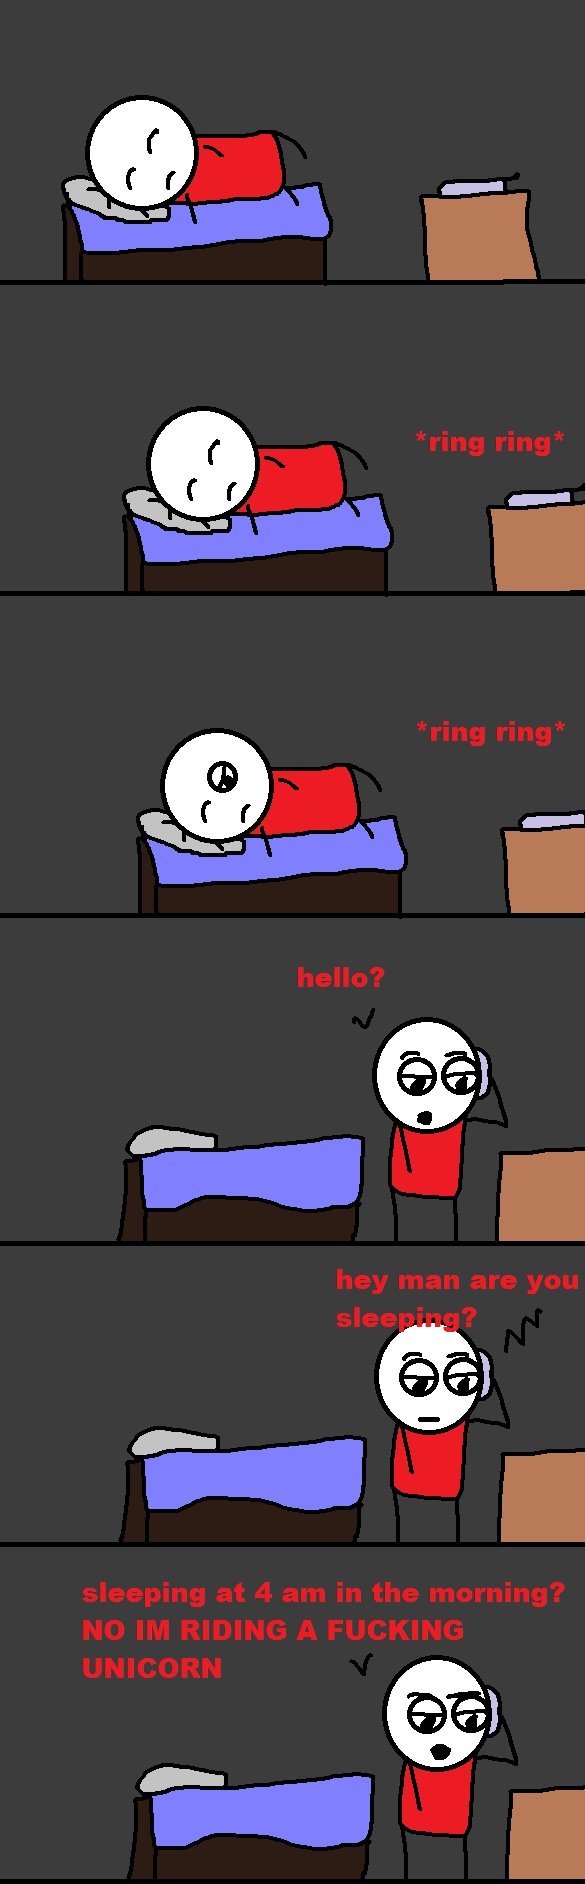 cartoon - ring ring ring ring hello? hey man are you sleeping? sleeping at 4 am in the morning? No Im Riding A Fucking Unicorn V